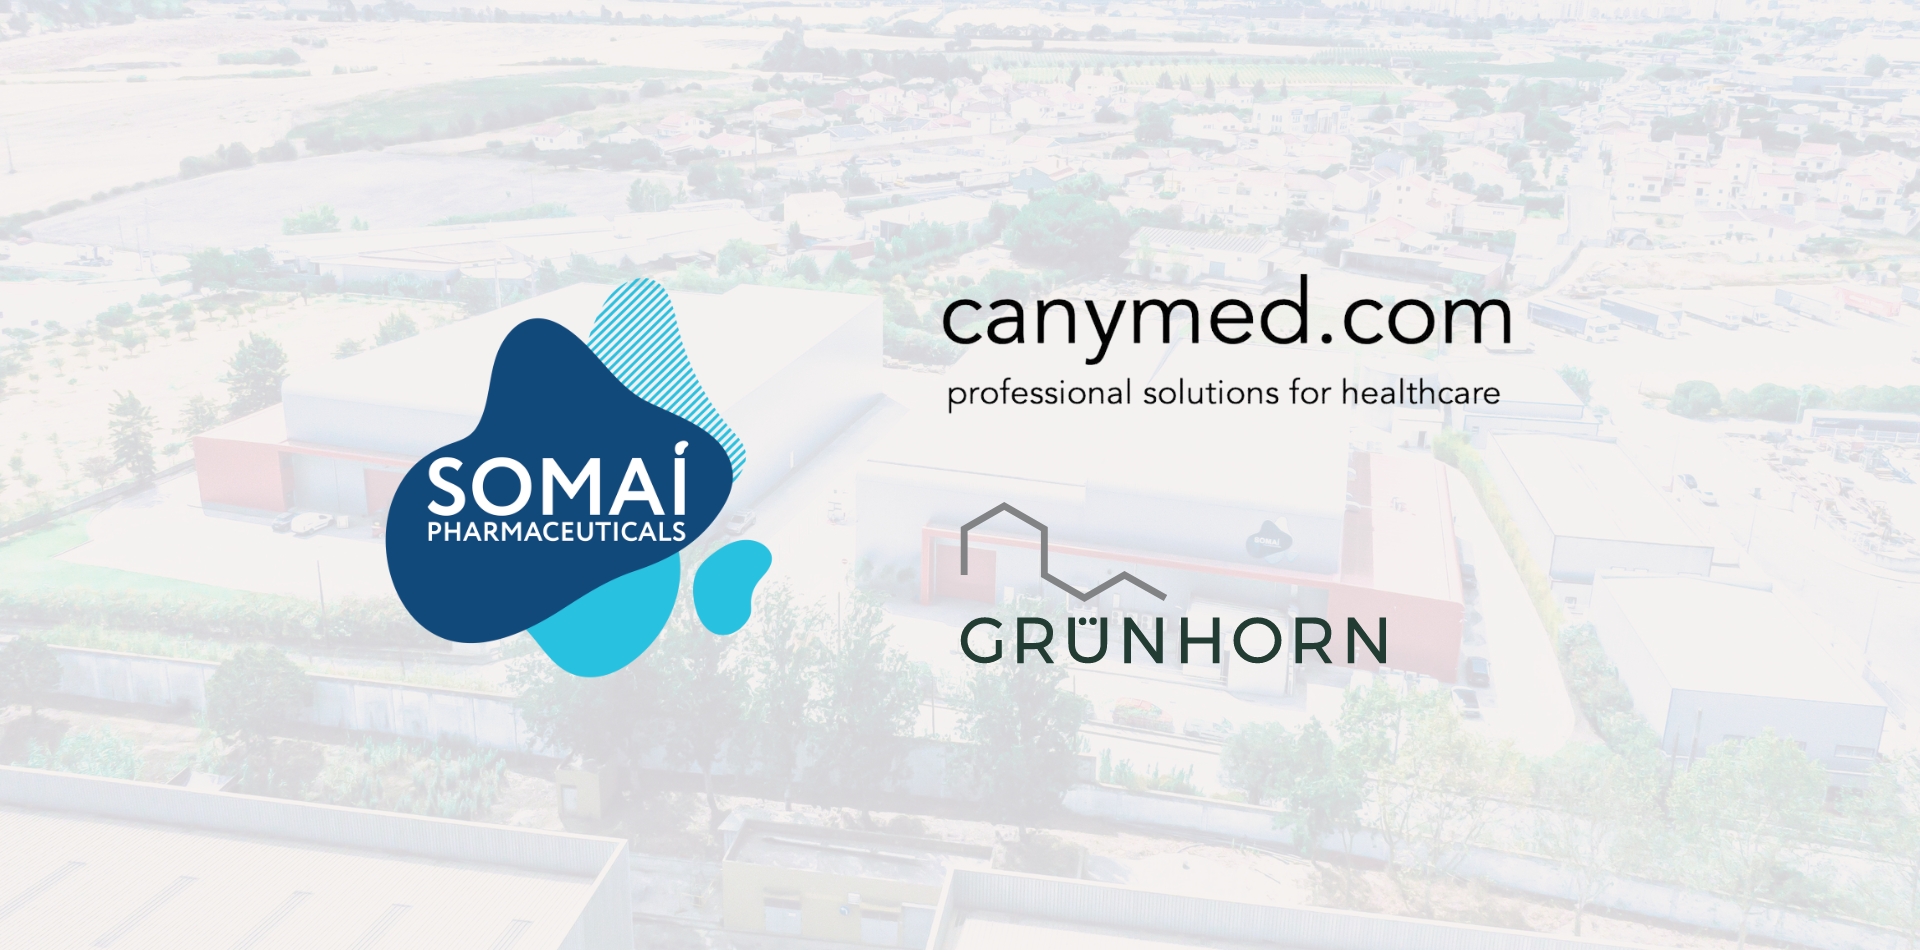 SOMAÍ Pharmaceuticals Enters German Market with Strategic Partnerships Securing €10 Million 2-year Distribution Deal